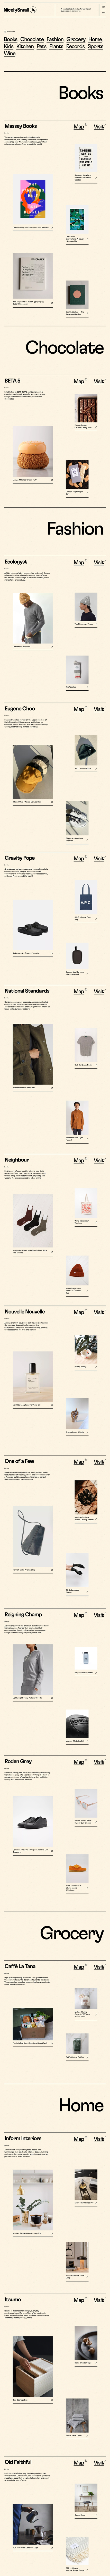 NicelySmall Landing Page Example: A curated list of design forward small businesses in Vancouver.